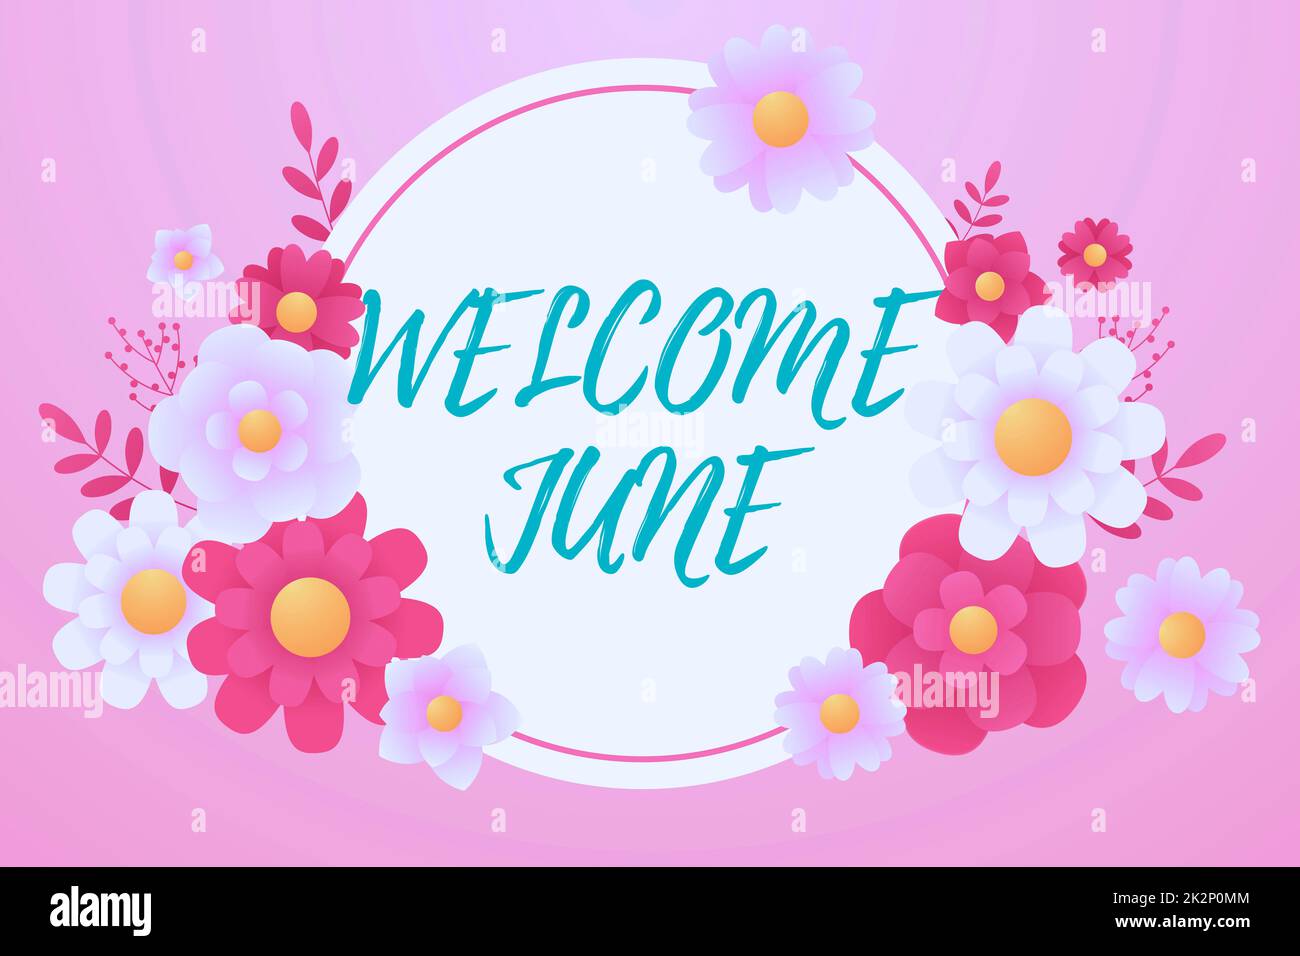 Writing displaying text Welcome June. Word for Calendar Sixth Month Second Quarter Thirty days Greetings Frame Decorated With Colorful Flowers And Foliage Arranged Harmoniously. Stock Photo